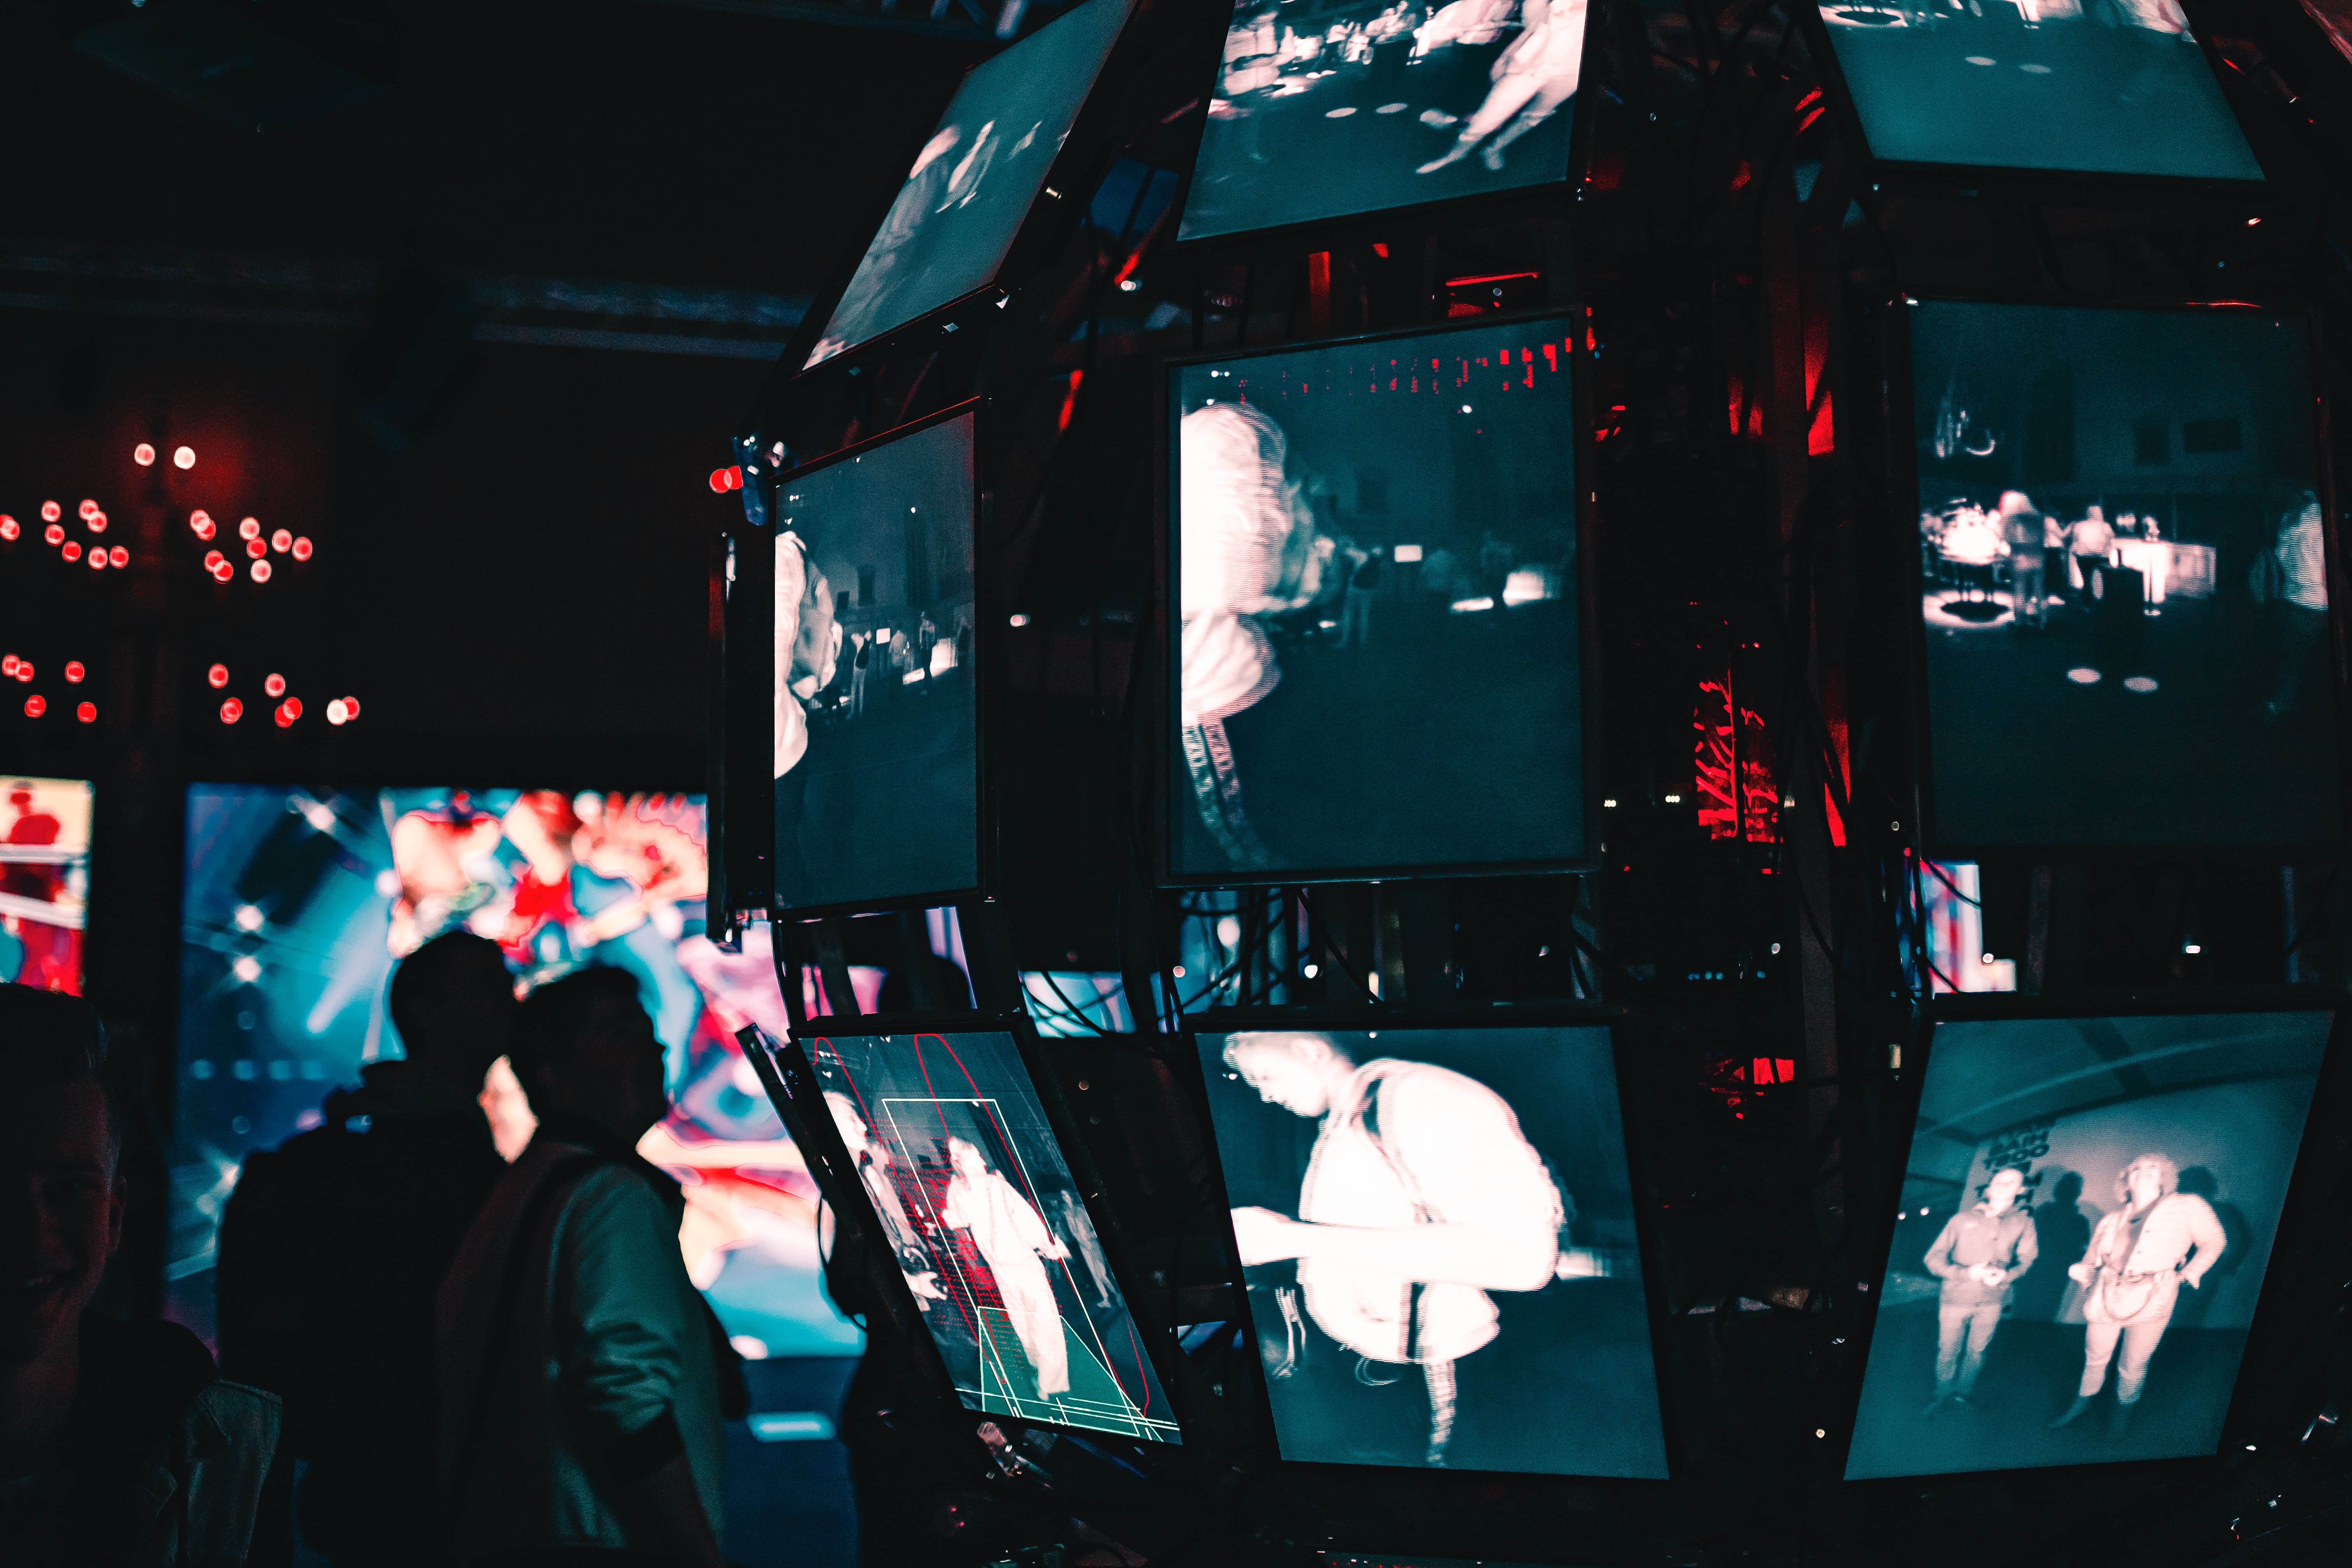 A sphere made of television screens displays different images of people.